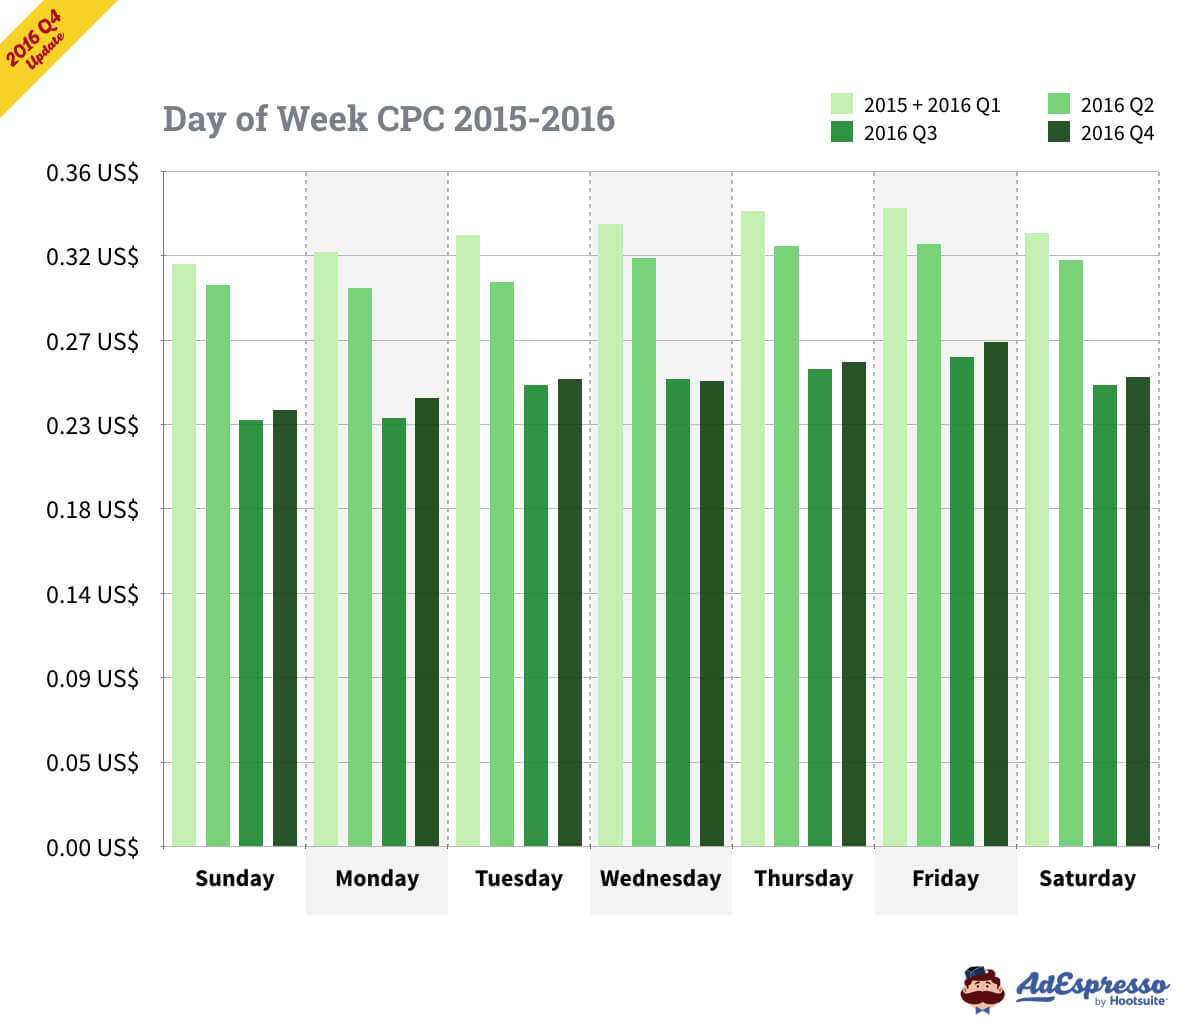 fb ads cost 2016 Q4 day of week